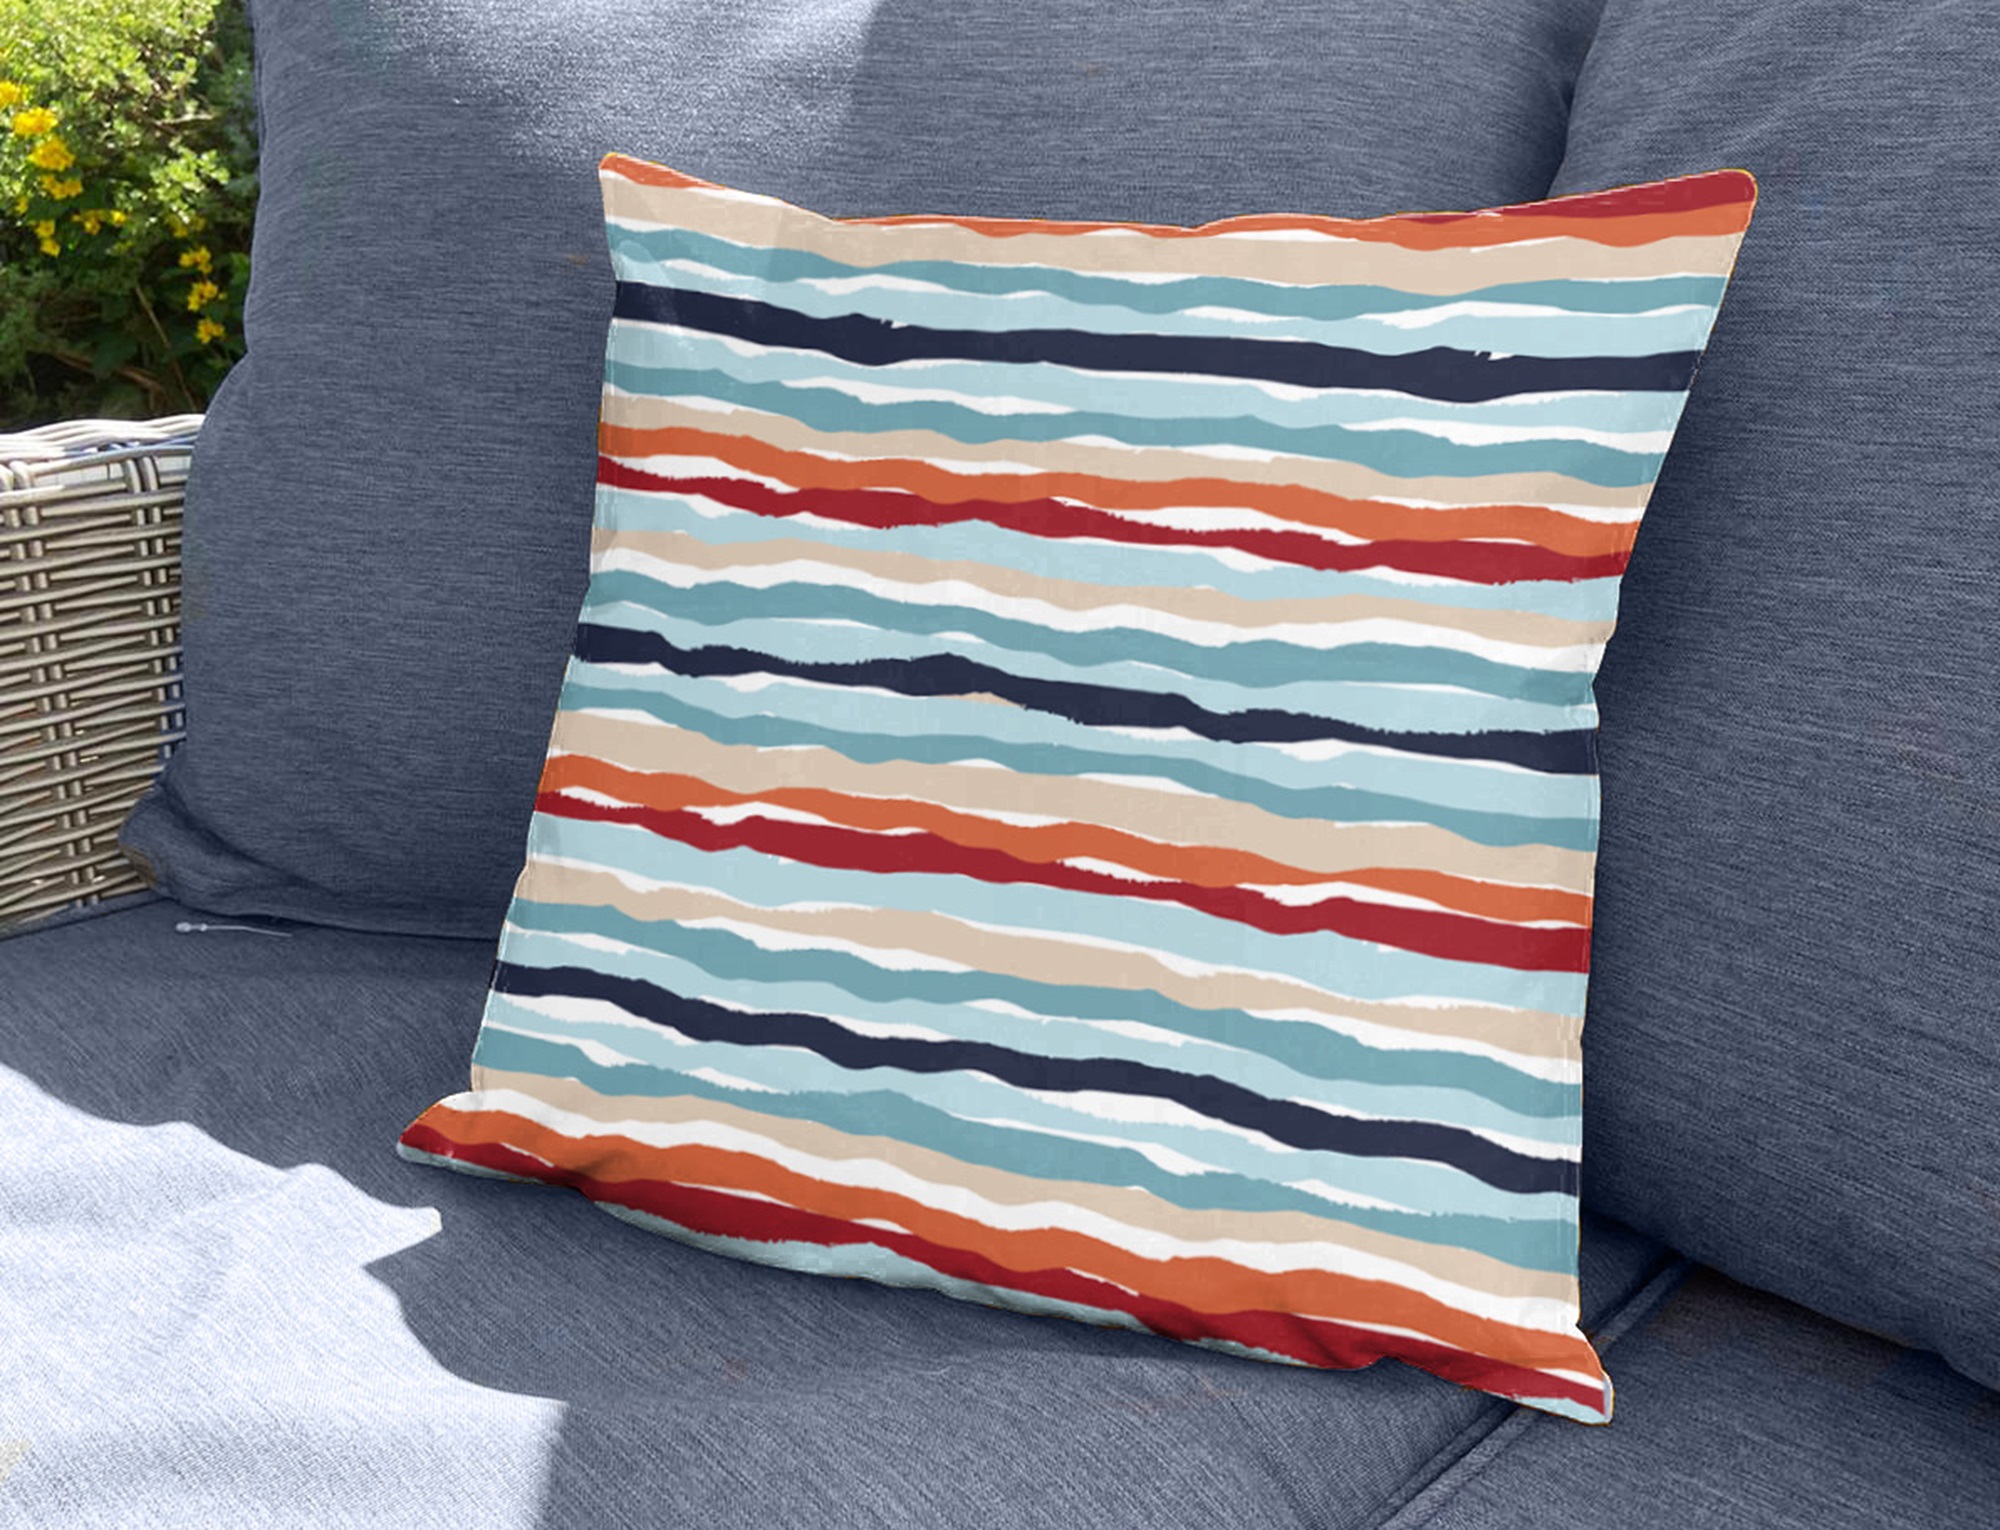 A square, coral and white striped throw pillow sits on a couch with a blue and white striped pattern.